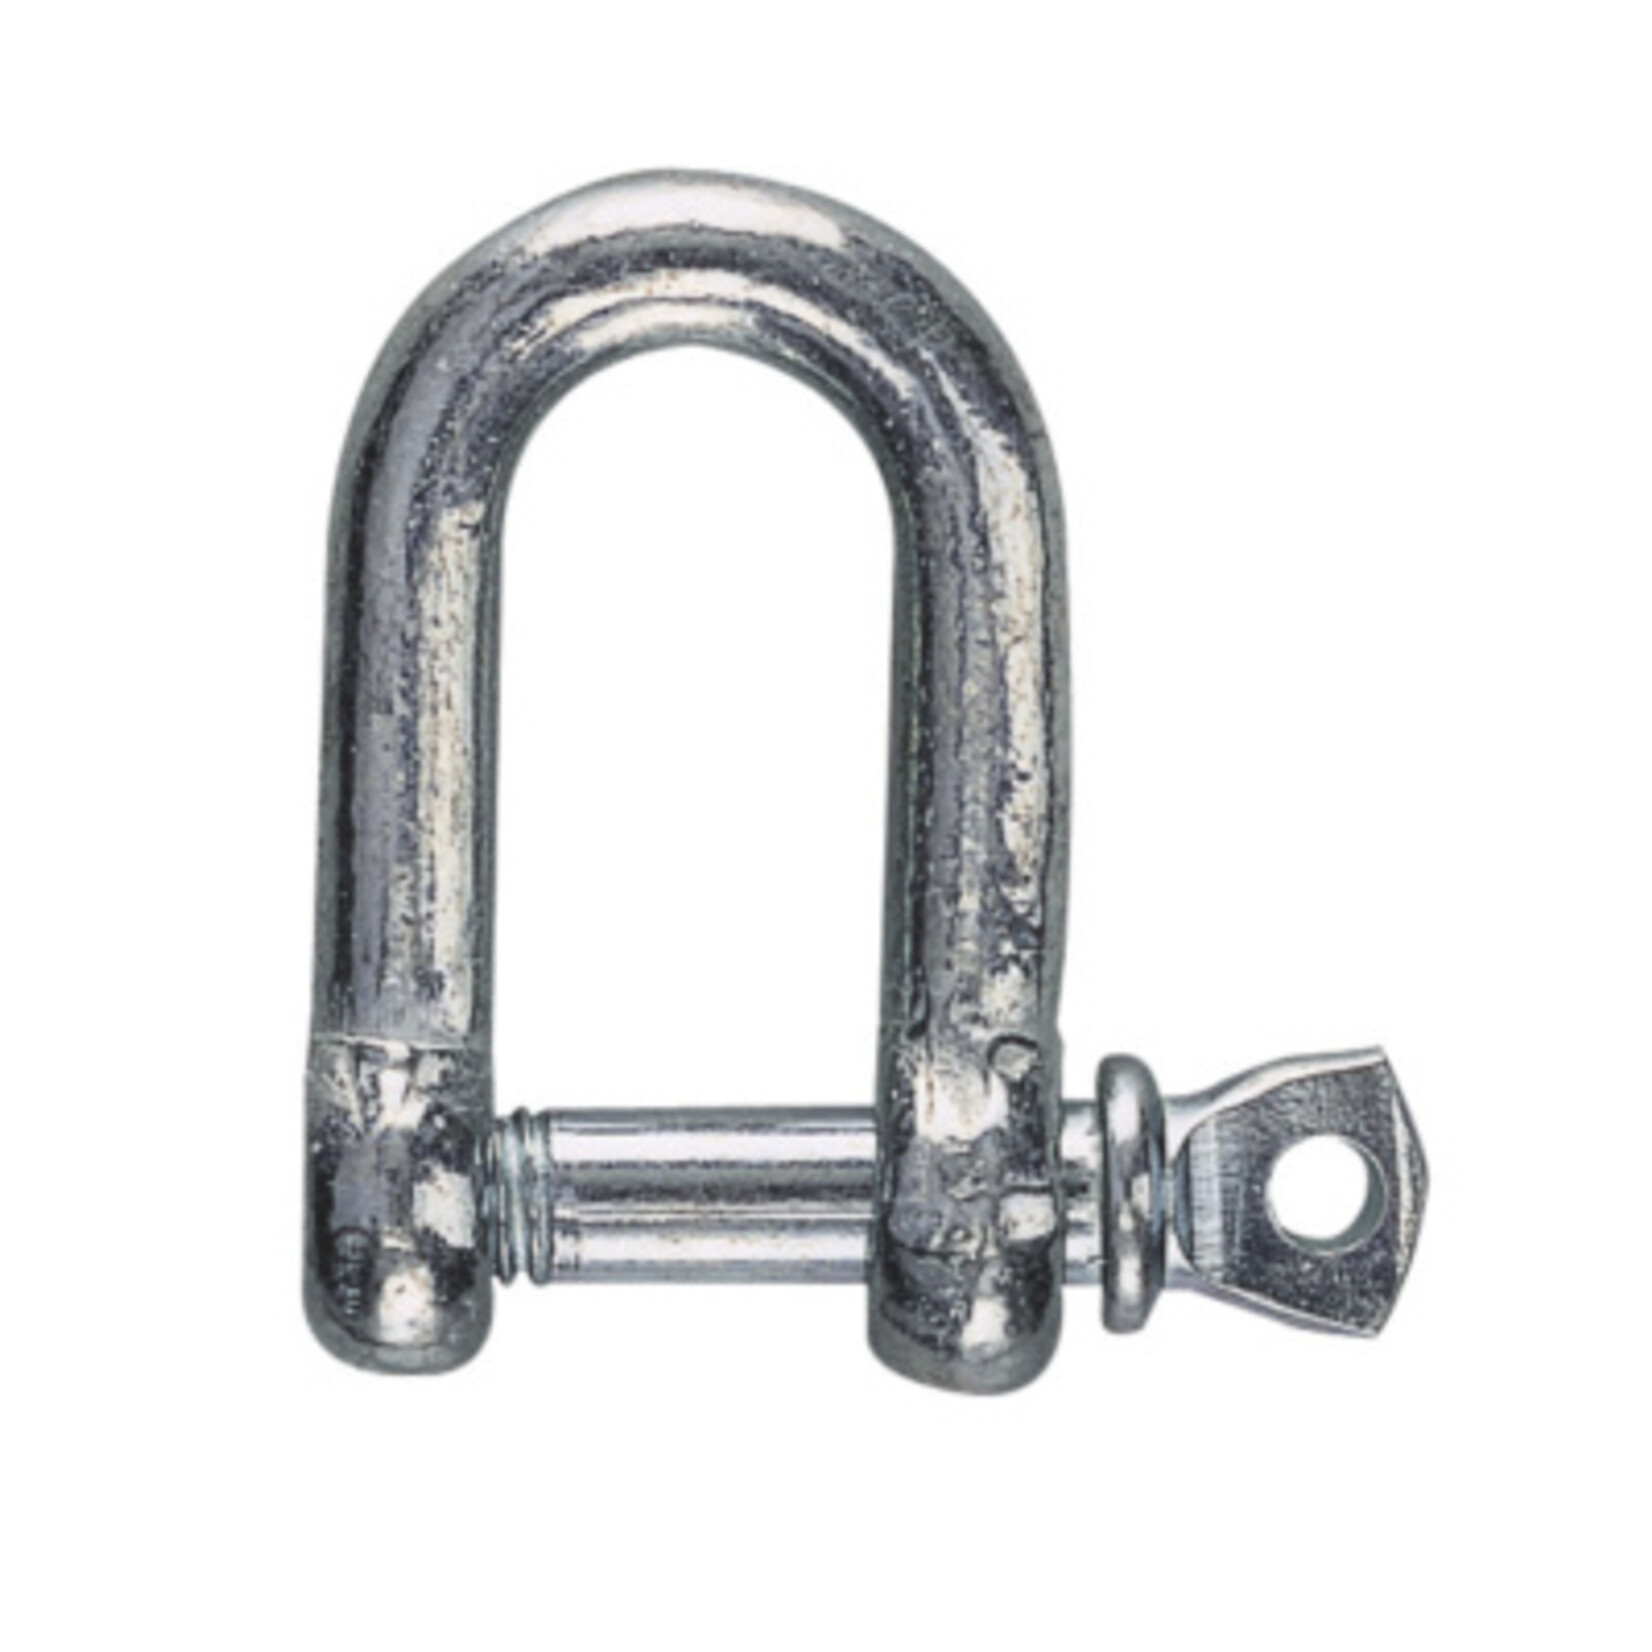 Plastimo Shackle gal d-shap dia 8mm yellow code